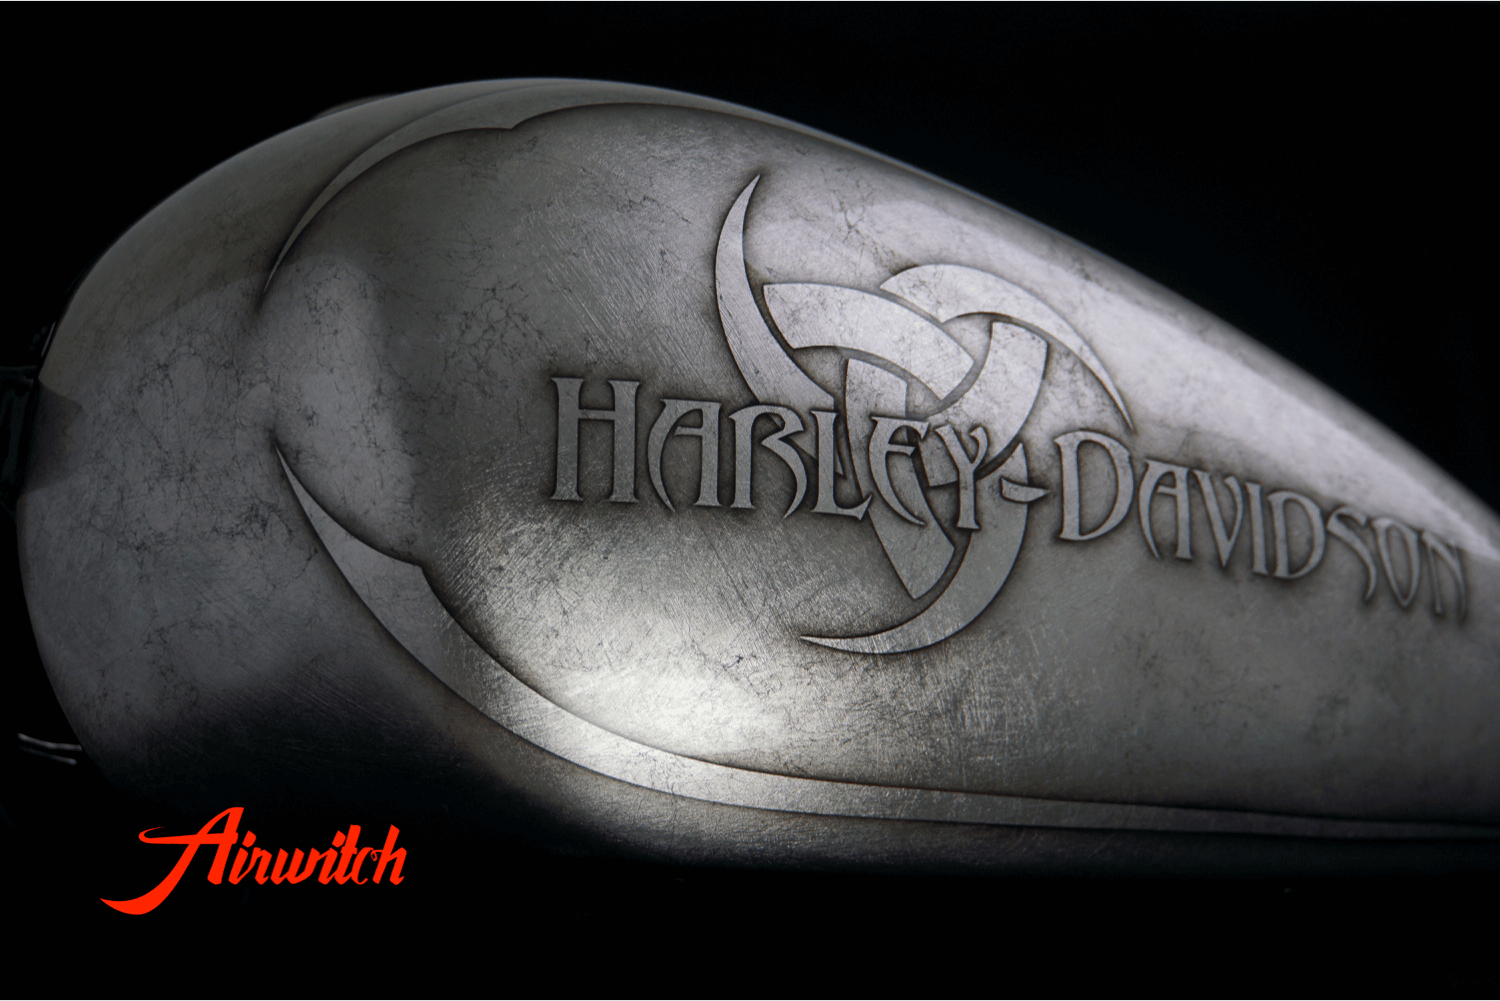 ustom Paint Harley Davidson Breakout Viking with Odin, Silver leaf, celtic knot, Airbrush Tank, Airwitch